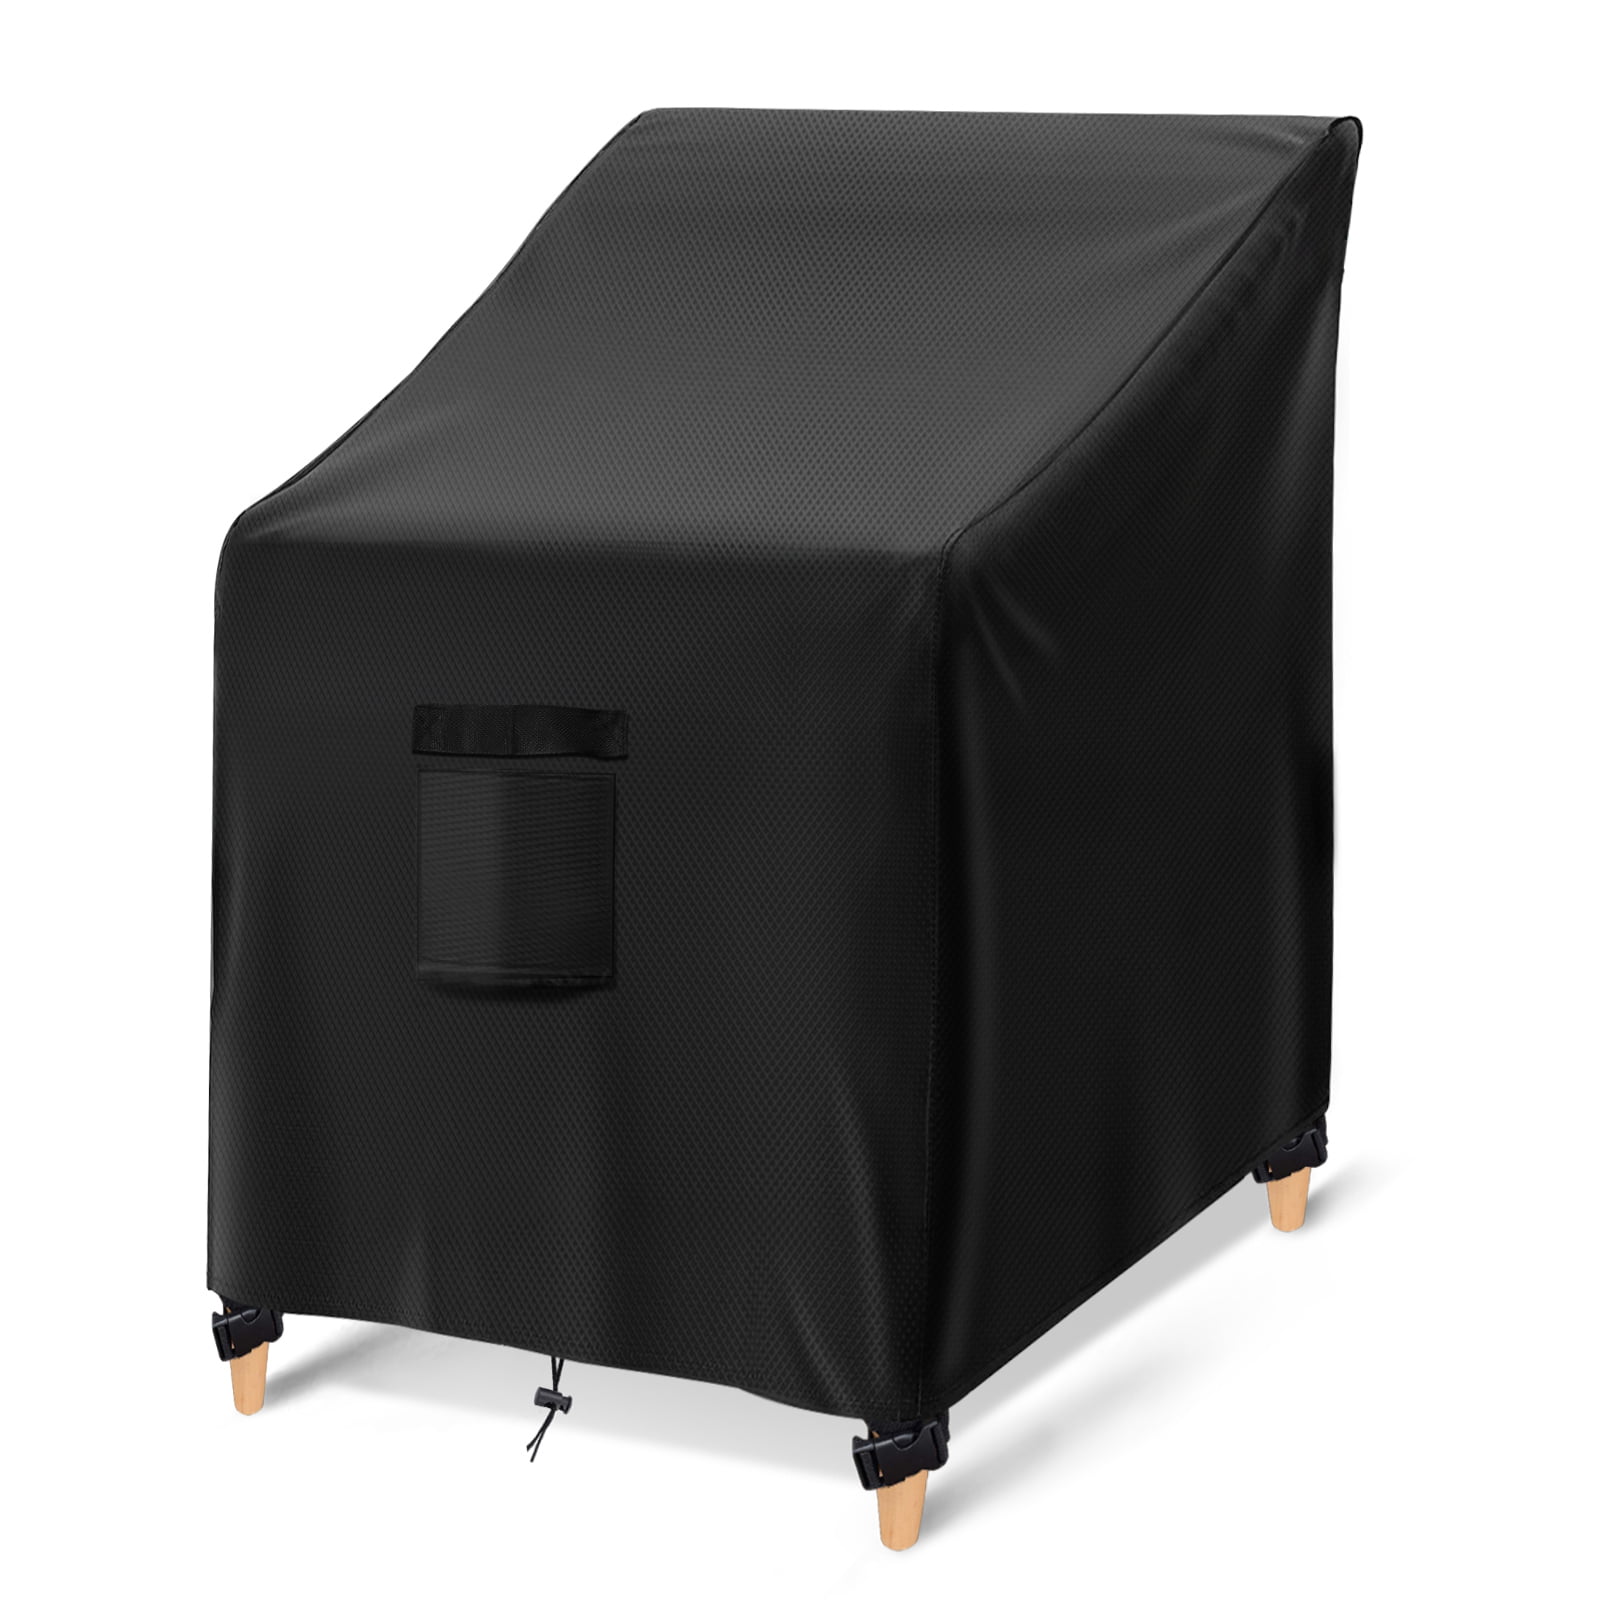 ULTCOVER Stackable Patio Chair Cover Black Waterproof Outdoor Stack of Chairs Cover 2 Pack Fits Up to 26L x 34W x 45H inches 